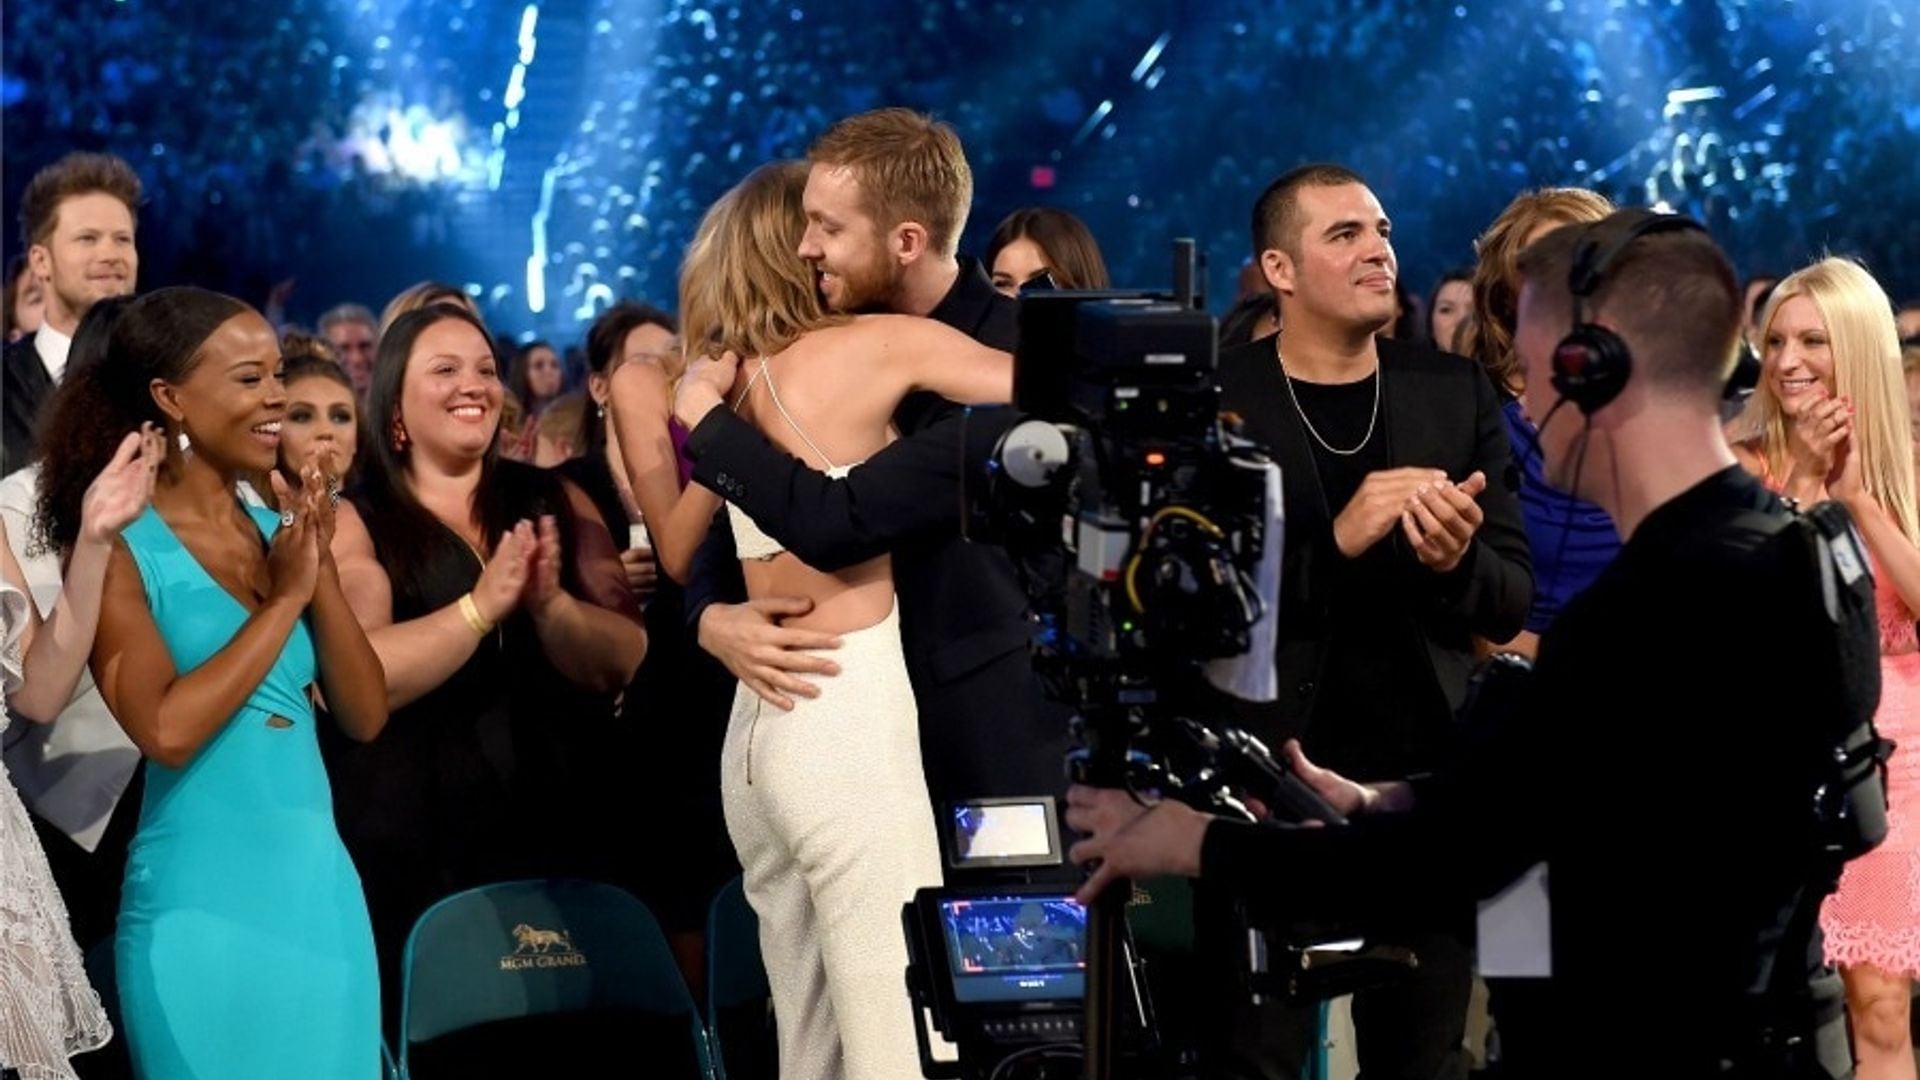 Calvin says when his relationship with Taylor ended "all hell broke loose."
Photo: Getty Images